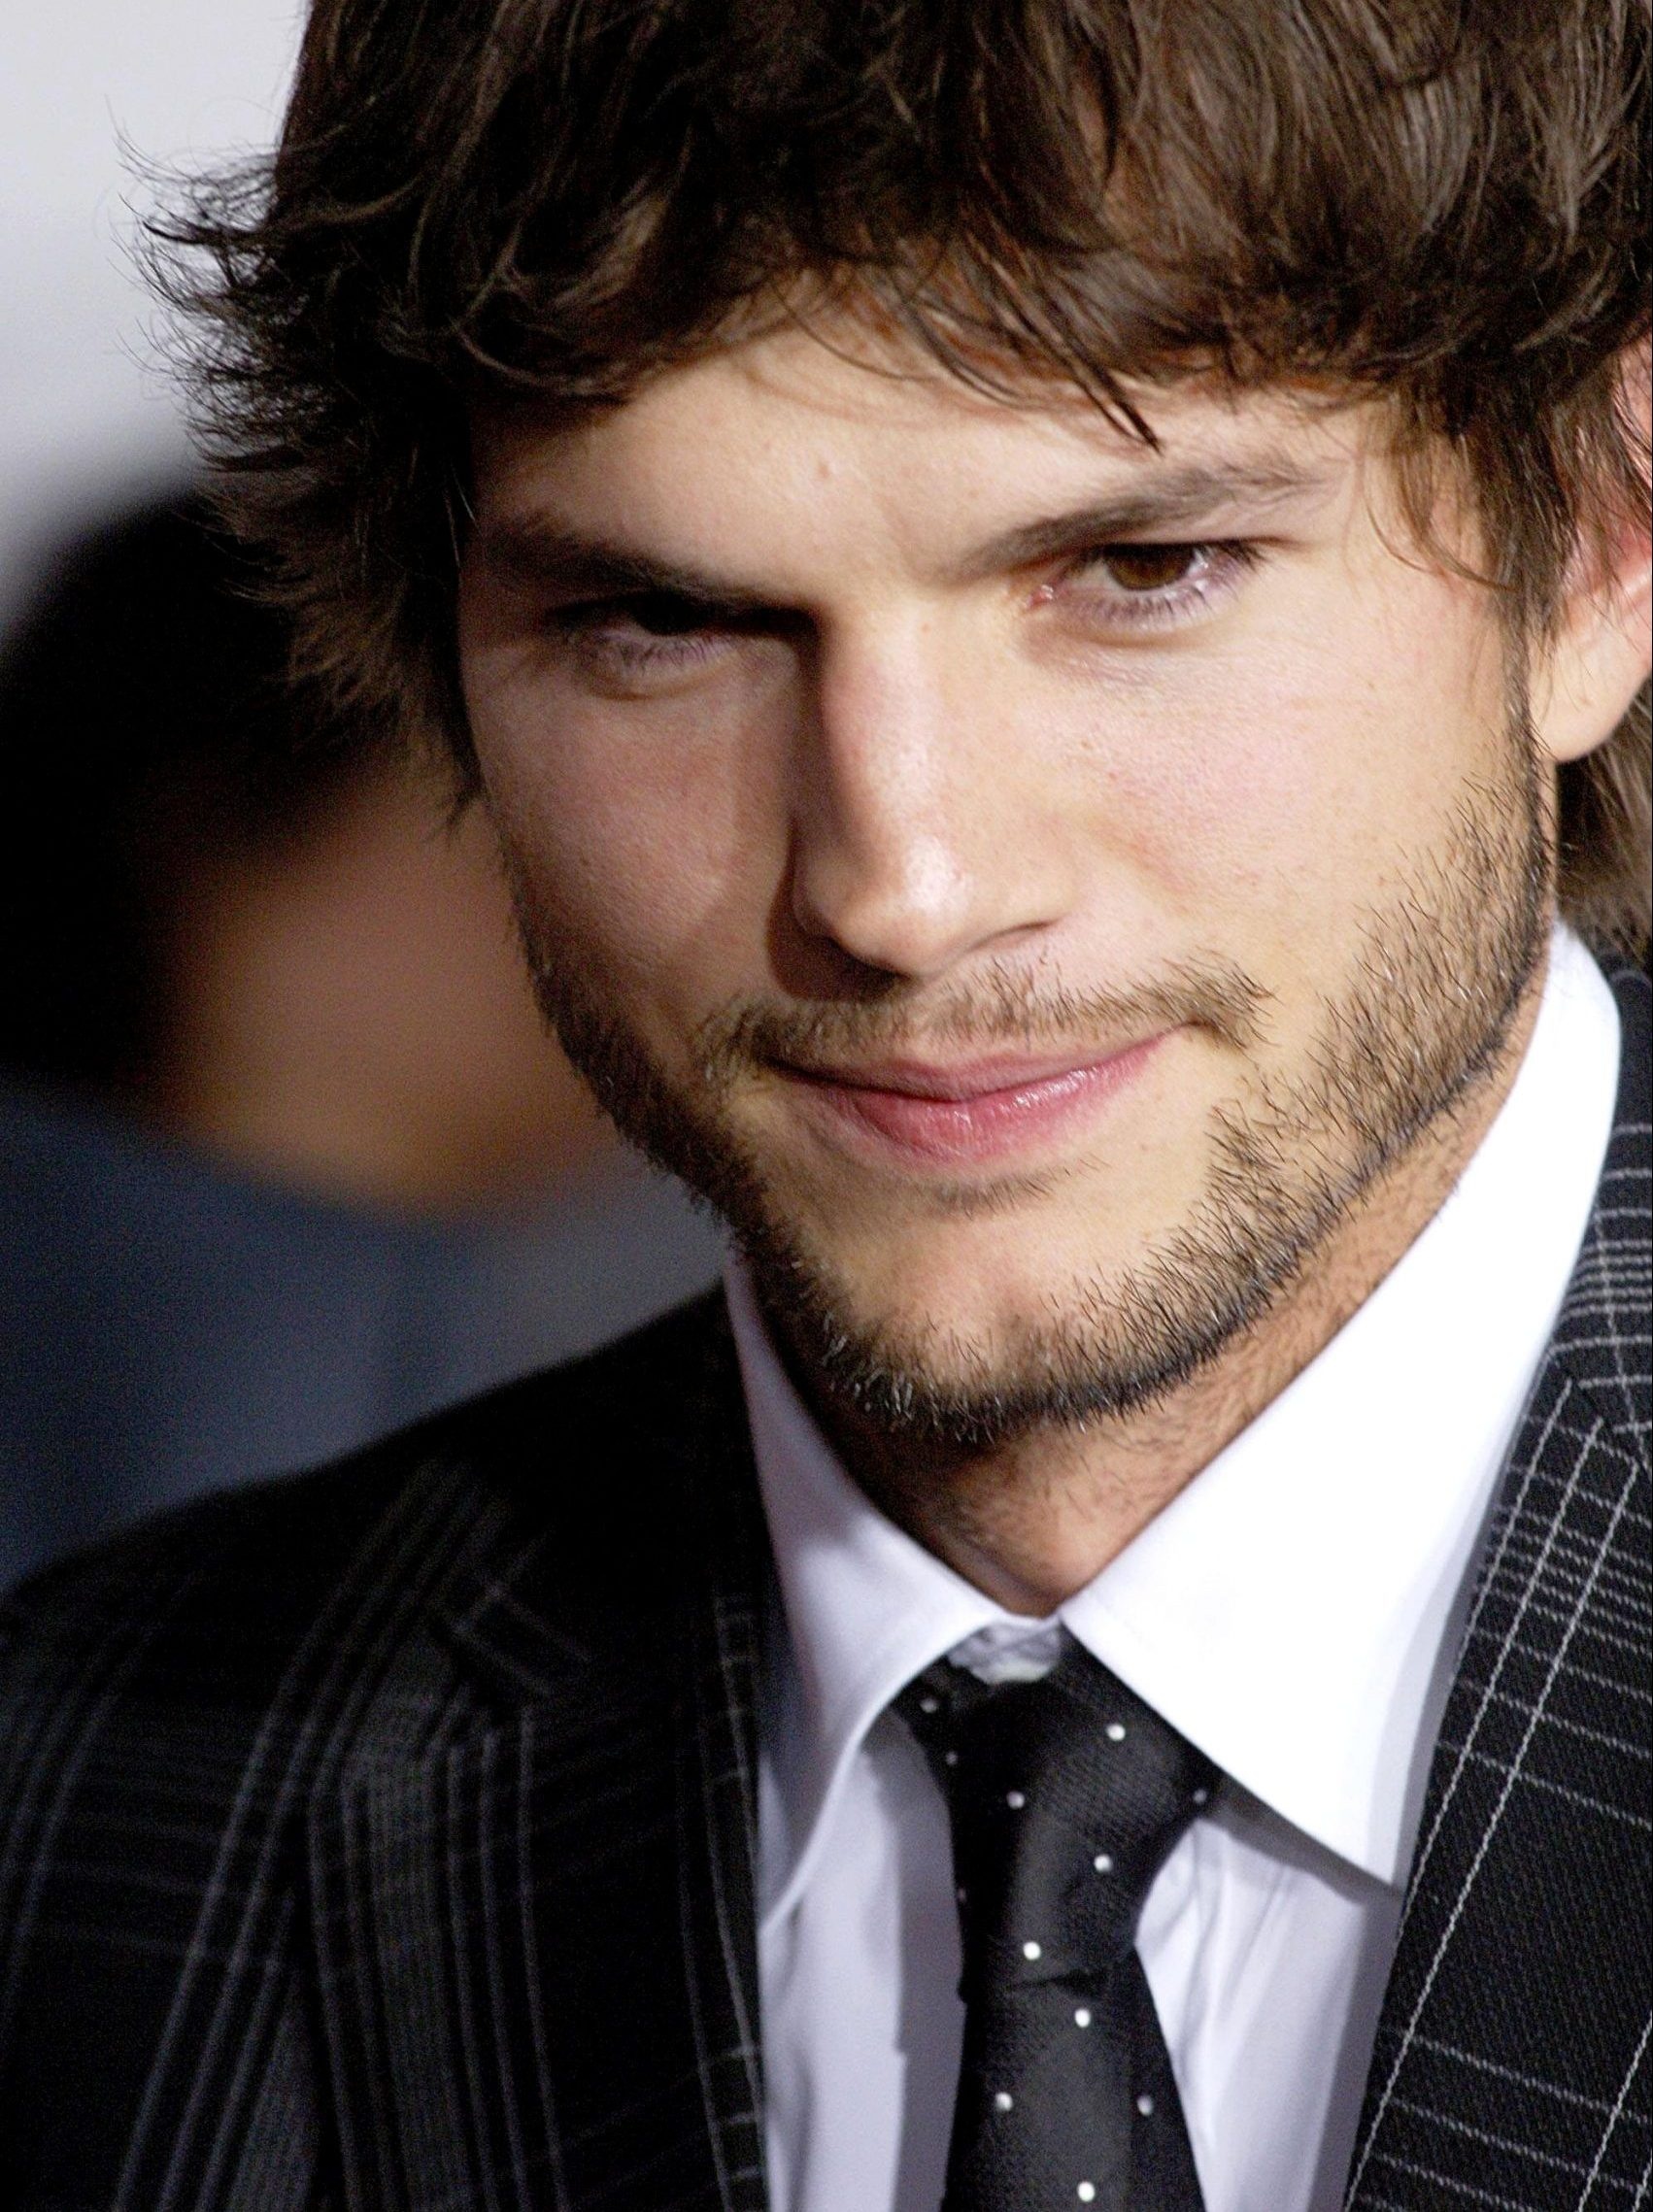 Ashton Kutcher Movies, Download free images, Celebrity pictures, Film stills, 1710x2280 HD Phone